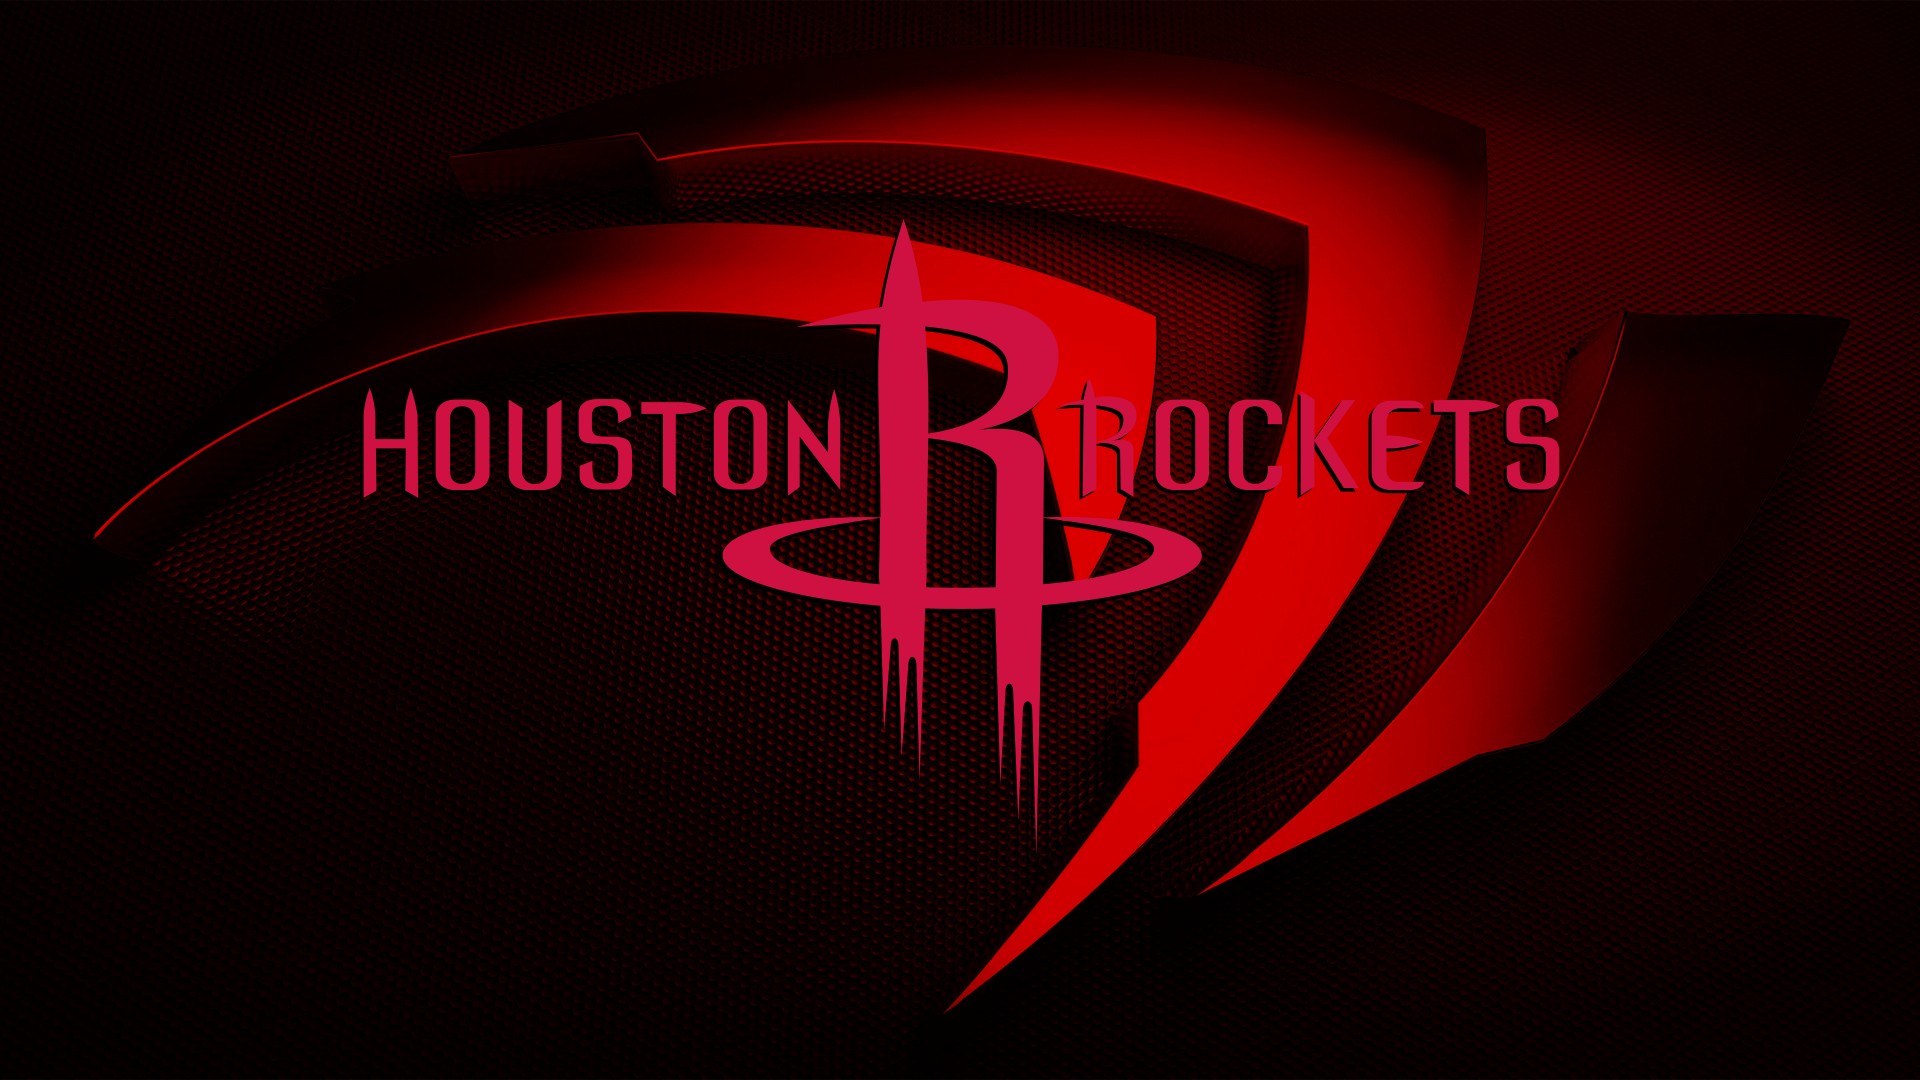 HD Houston Rockets Wallpapers with image dimensions 1920x1080 pixel. You can make this wallpaper for your Desktop Computer Backgrounds, Windows or Mac Screensavers, iPhone Lock screen, Tablet or Android and another Mobile Phone device